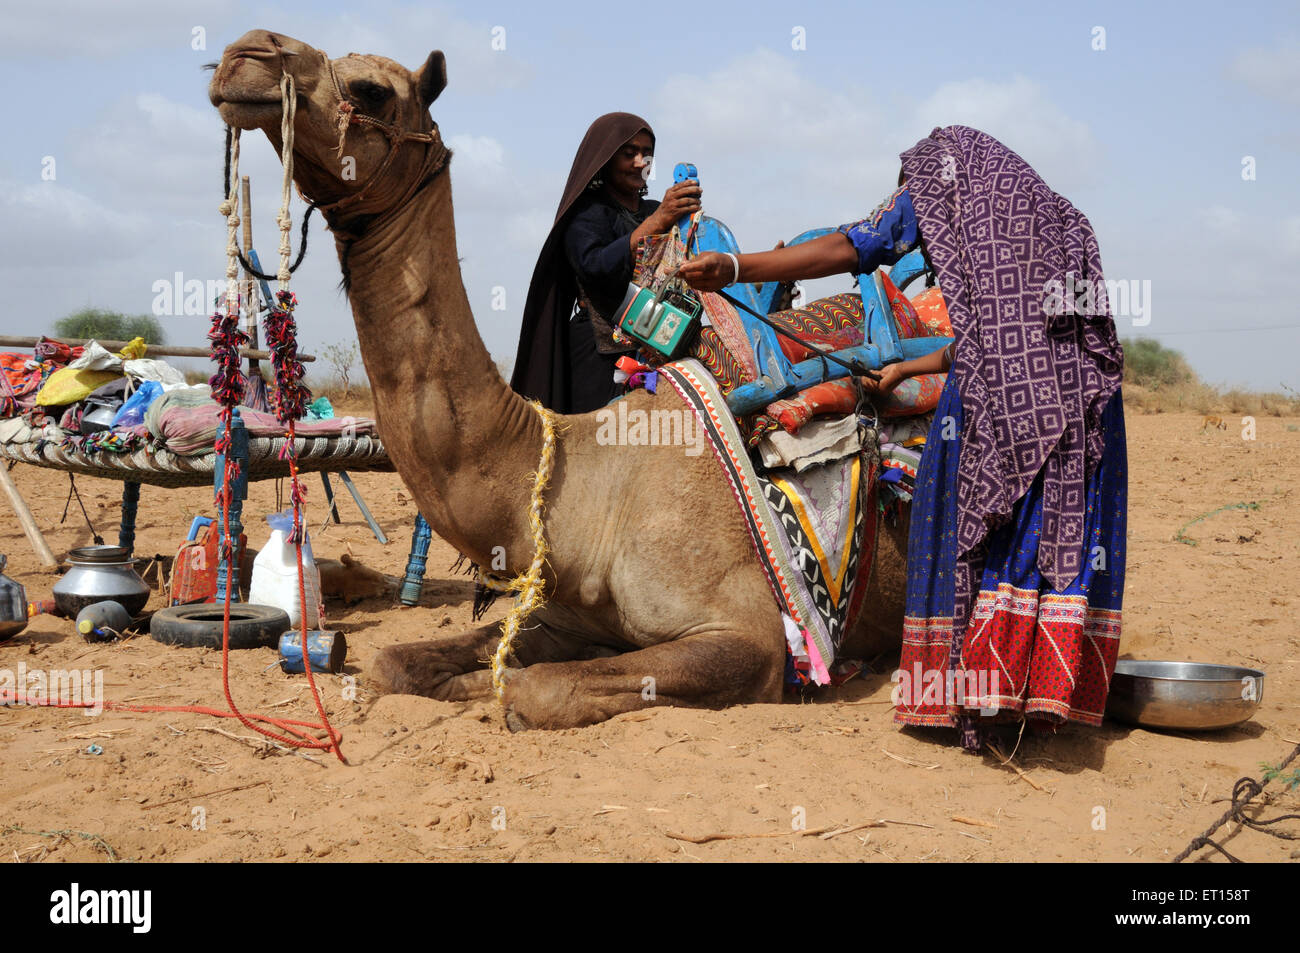 Gypsy tribal women carrying household thing on camel ; Kutch ; Gujarat ; India Stock Photo